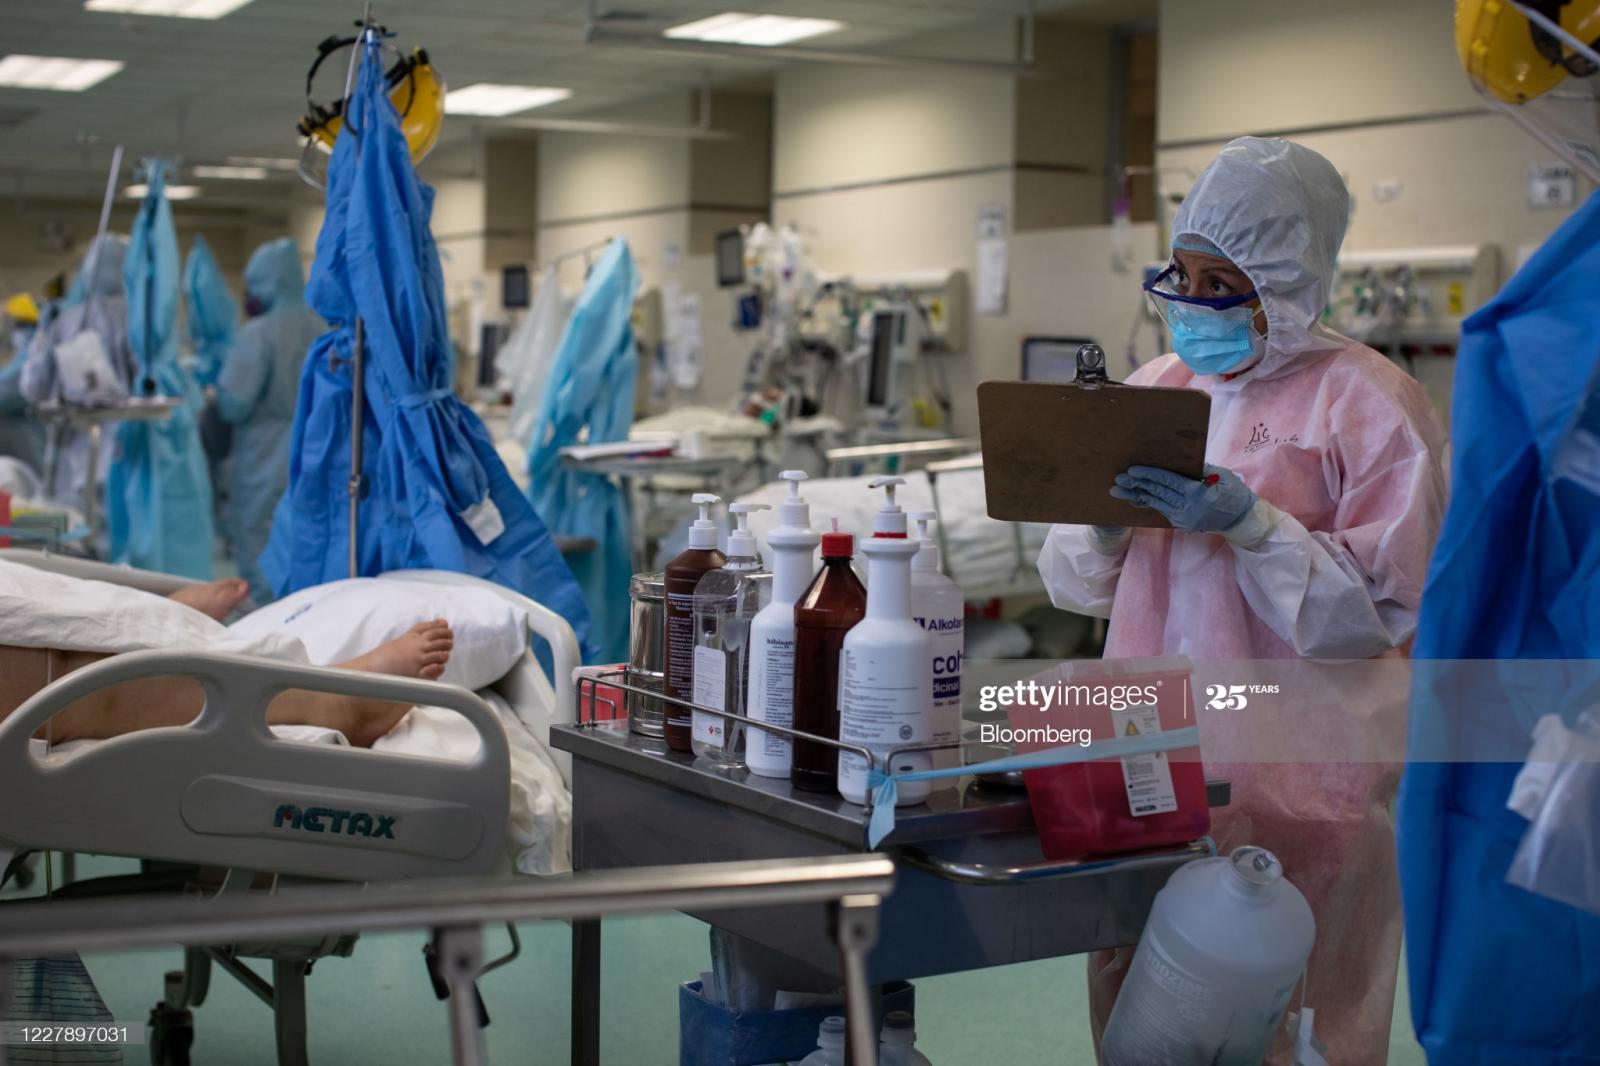 Thumbnail of Medical workers wearing personal_Ponce/Bloomberg via Getty Images